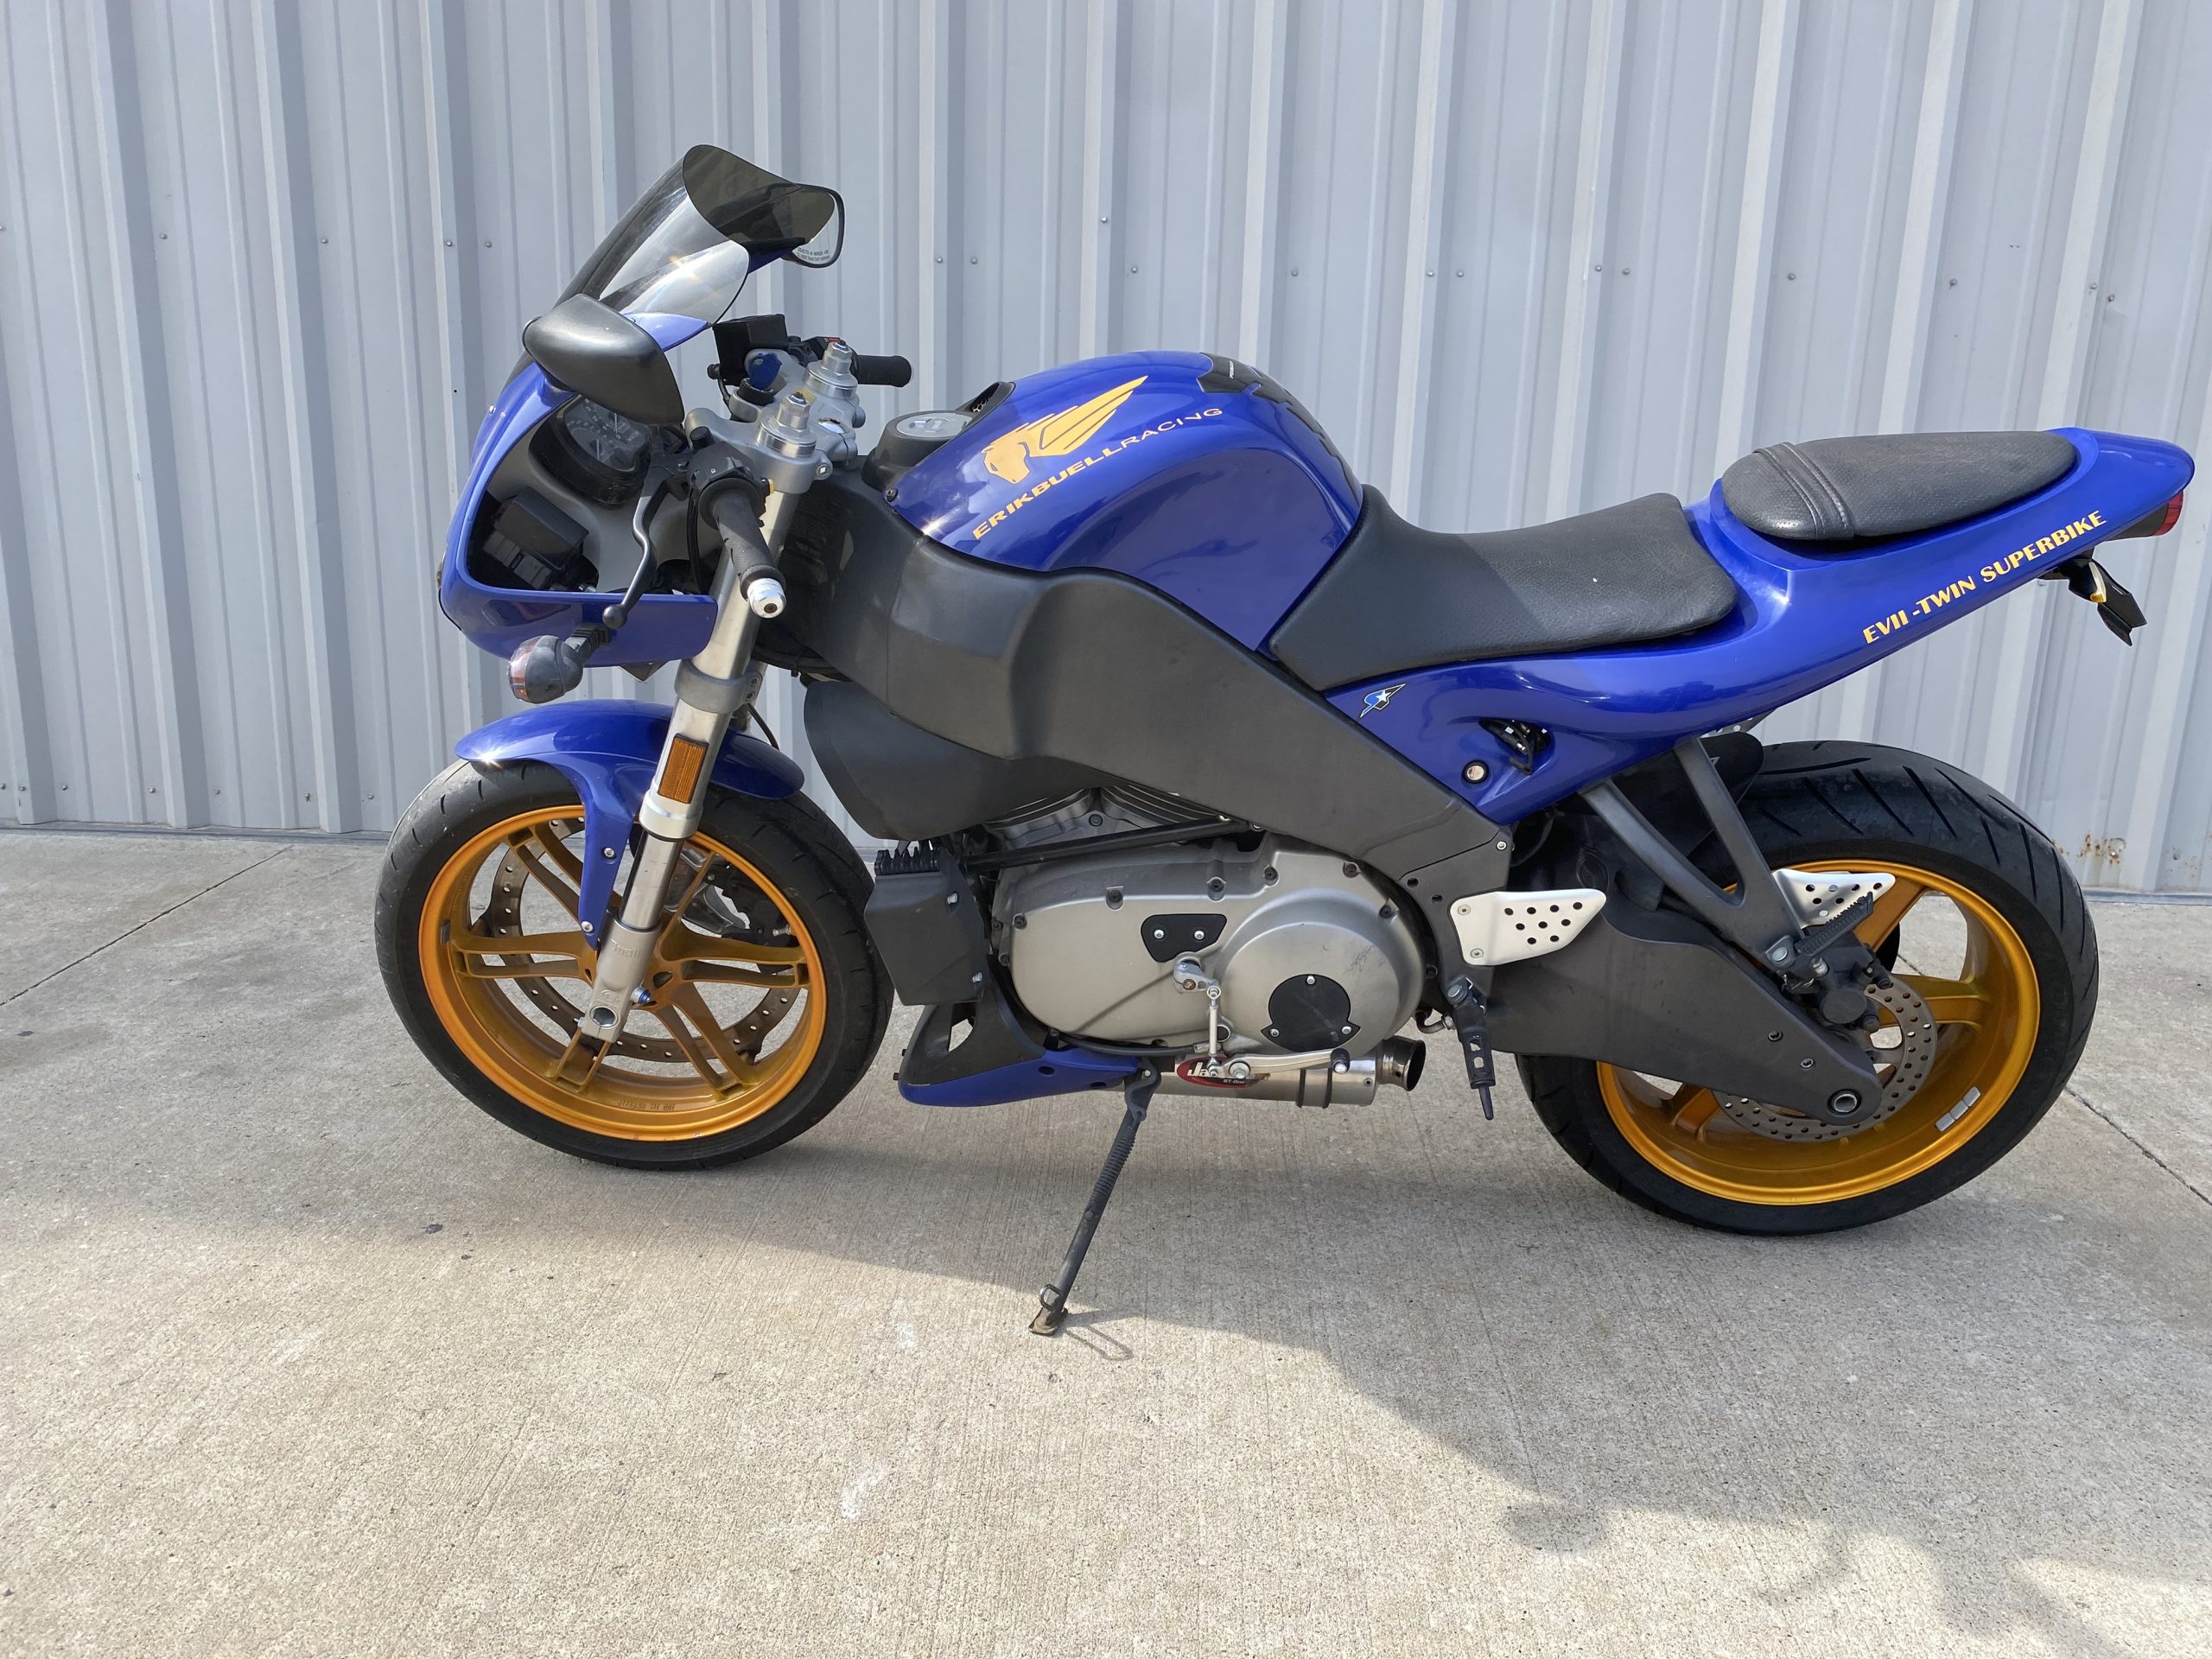 Buell XB12R For Sale, Rare Find: 2006 Buell XB12R for Sale at Knobtown Cycle &#8211; Only $6,500!, Knobtown Cycle